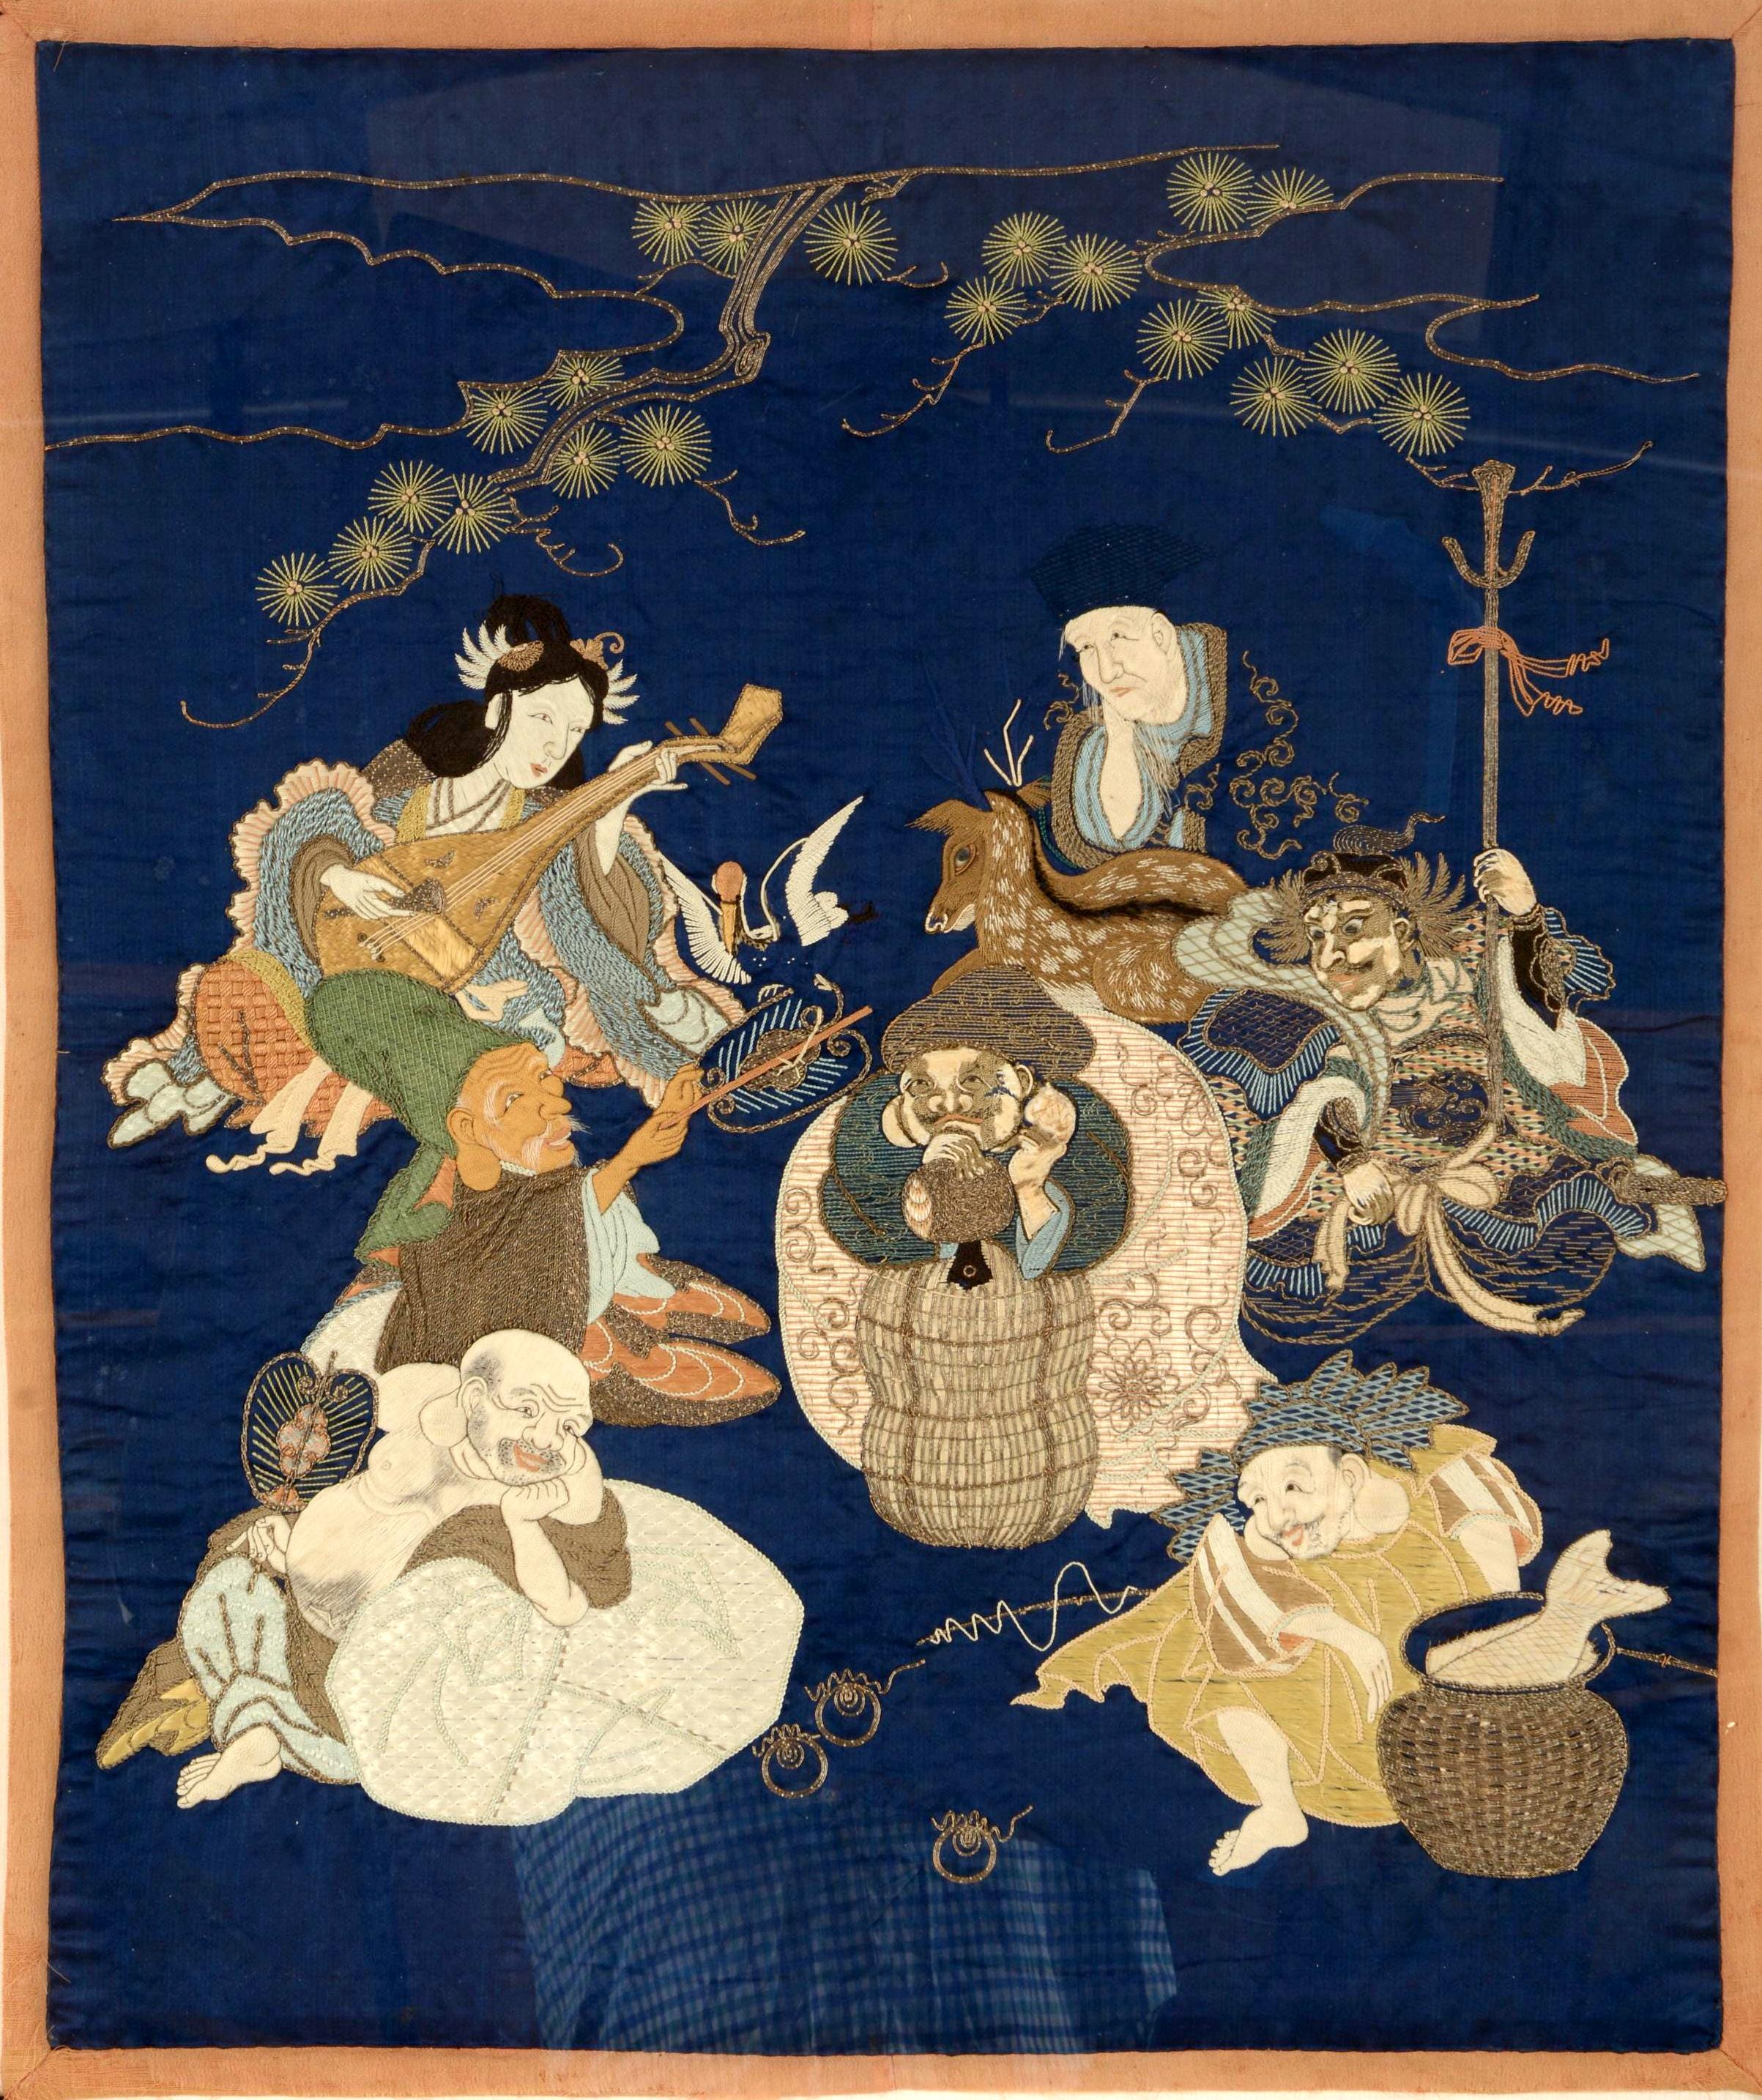 A Japanese Fukusa Panel with tassels displayed in a gilt frame circa Meiji Period. Fukusa is a traditional Japanese textile art used as a wrap for presenting gifts at important occasions. On the deep blue background, the elaborate embroidery work